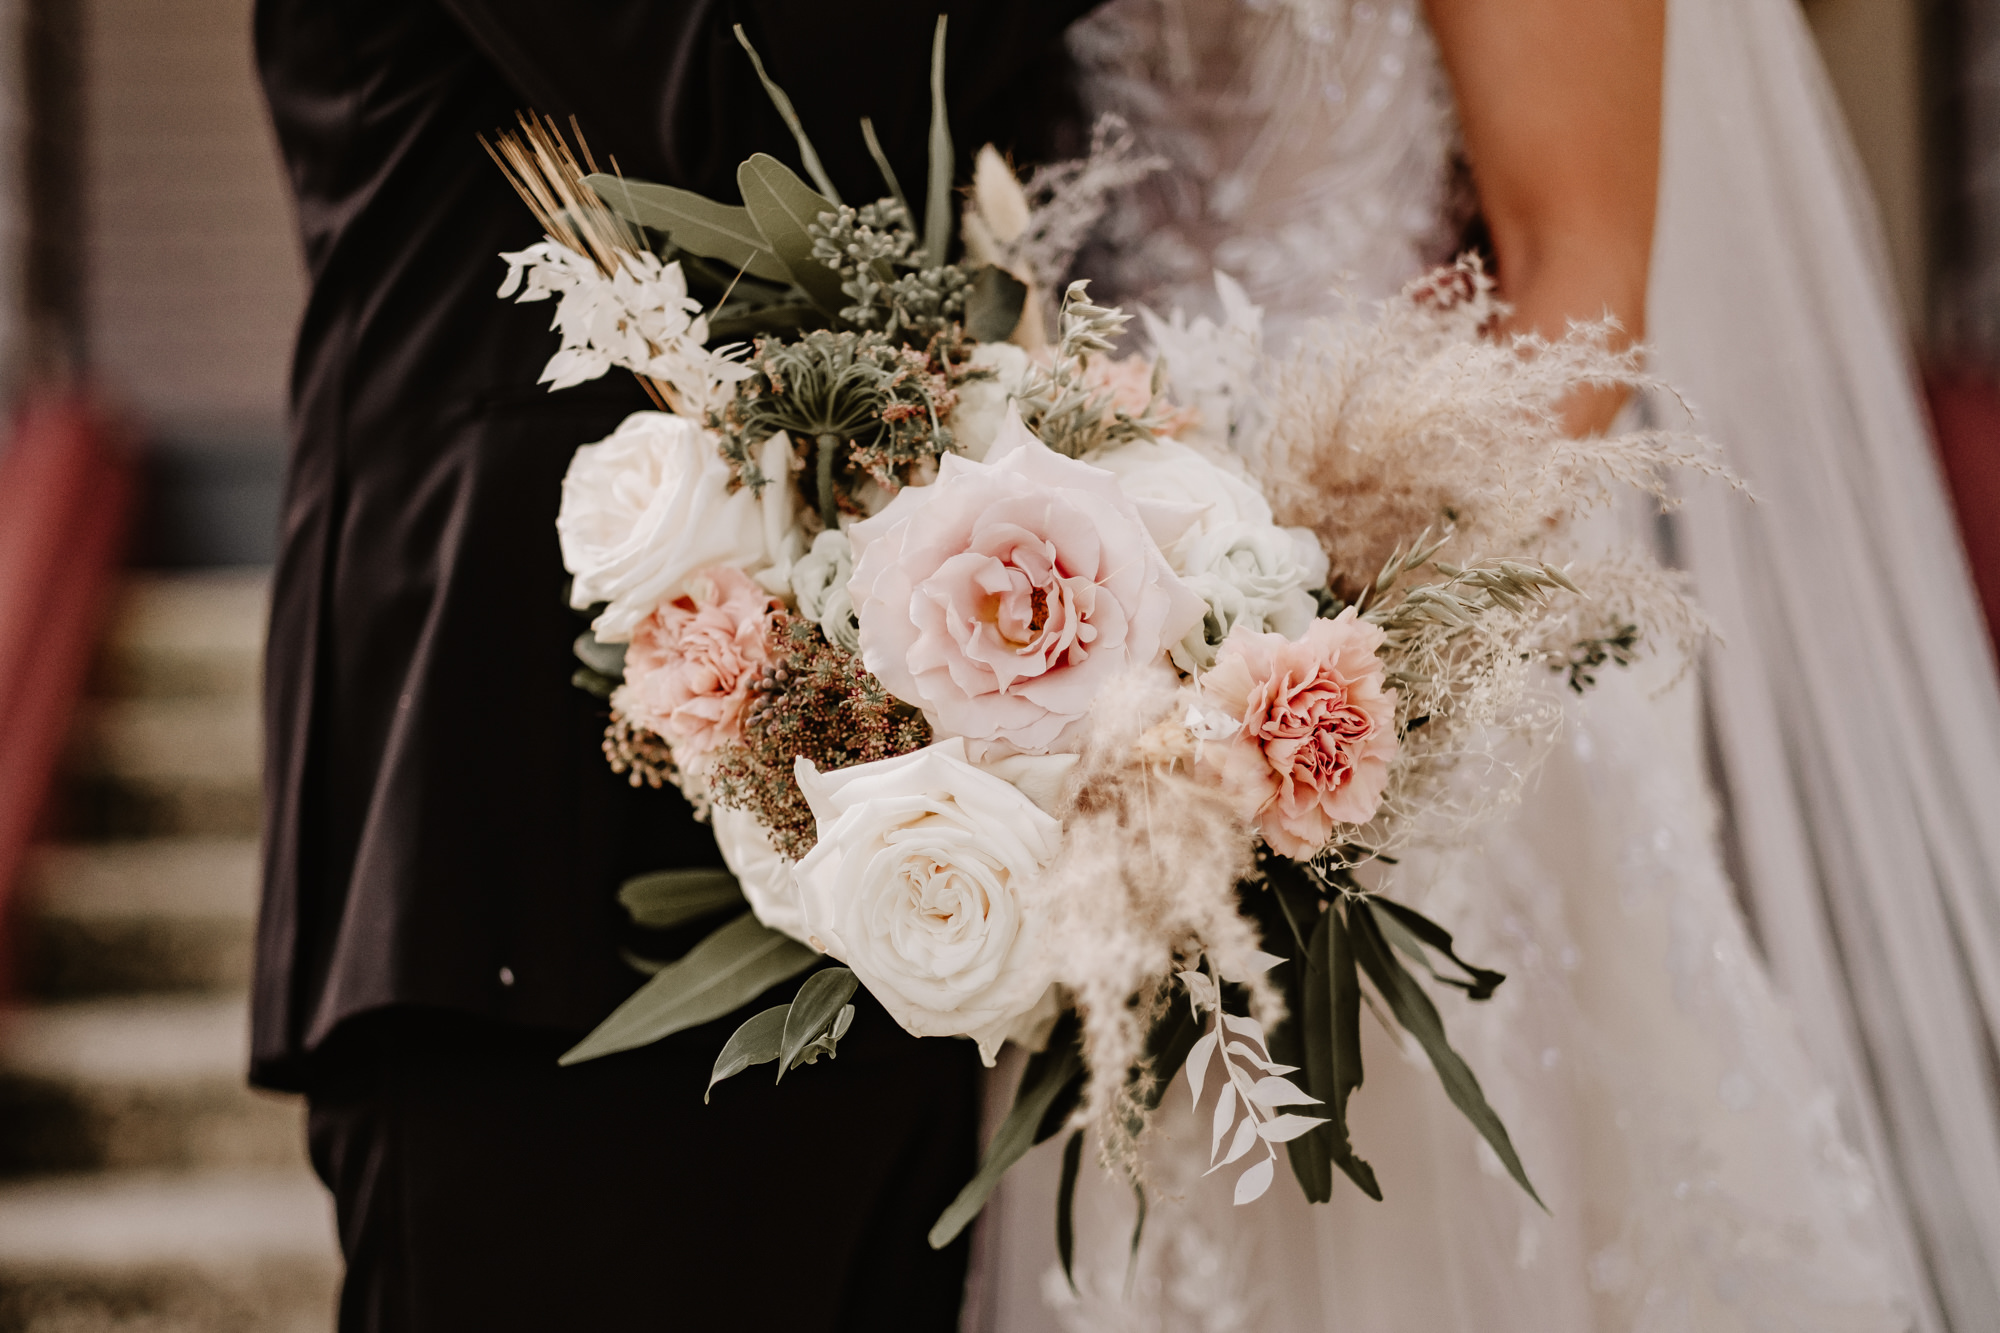 Neutral Boho Modern Floral Bouquet, White and Blush Pink Roses, Carnations, Pampas Grass, Greenery and Dried Leaves